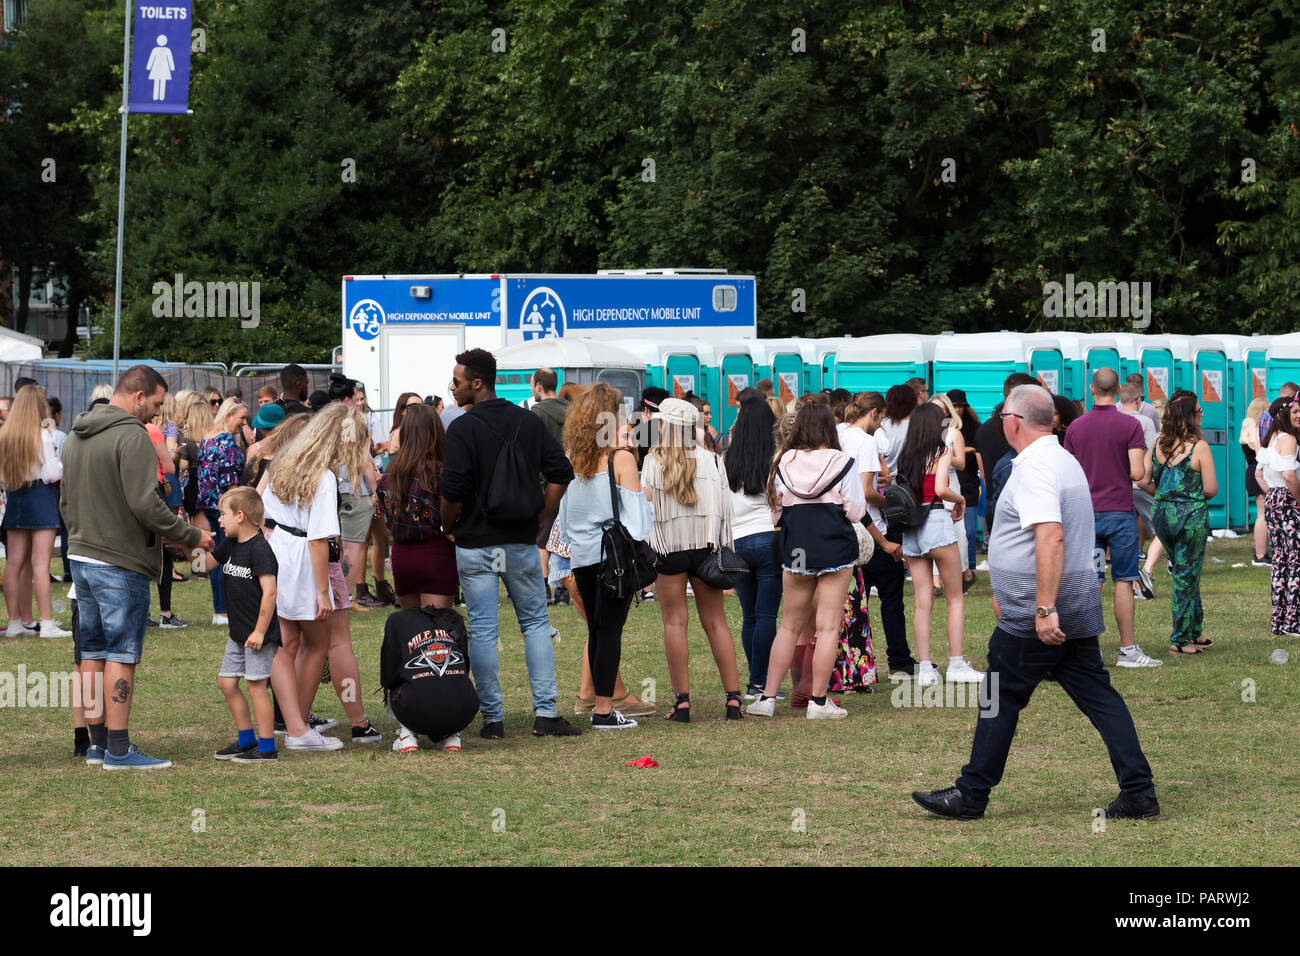 Queuing for toilets at the 2018 Liverpool International Music Festival in Sefton Park. Stock Photo